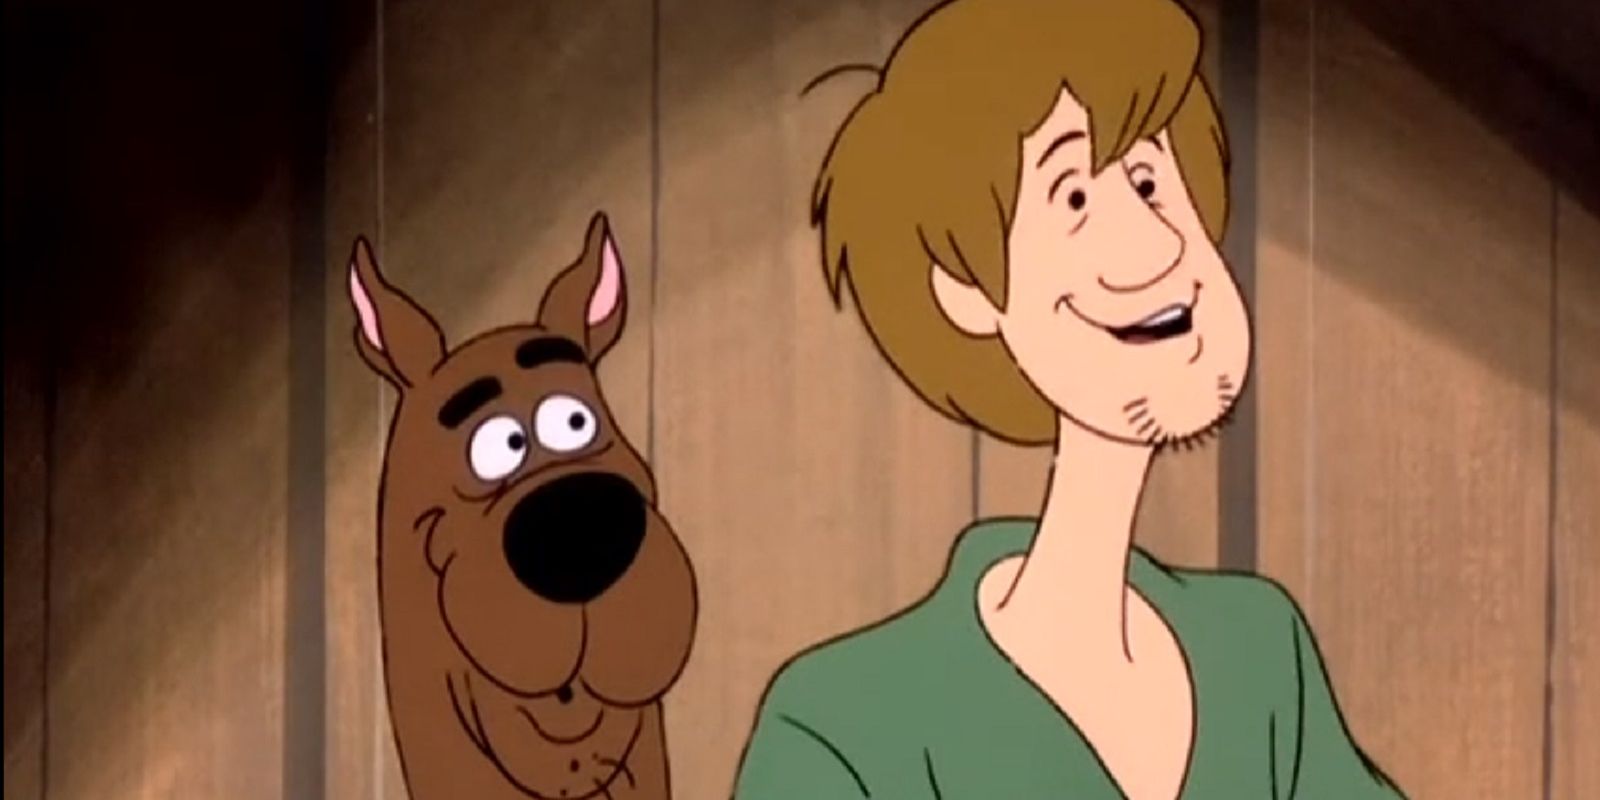 Shaggy and Scooby-Doo in The Scooby-Doo Show.